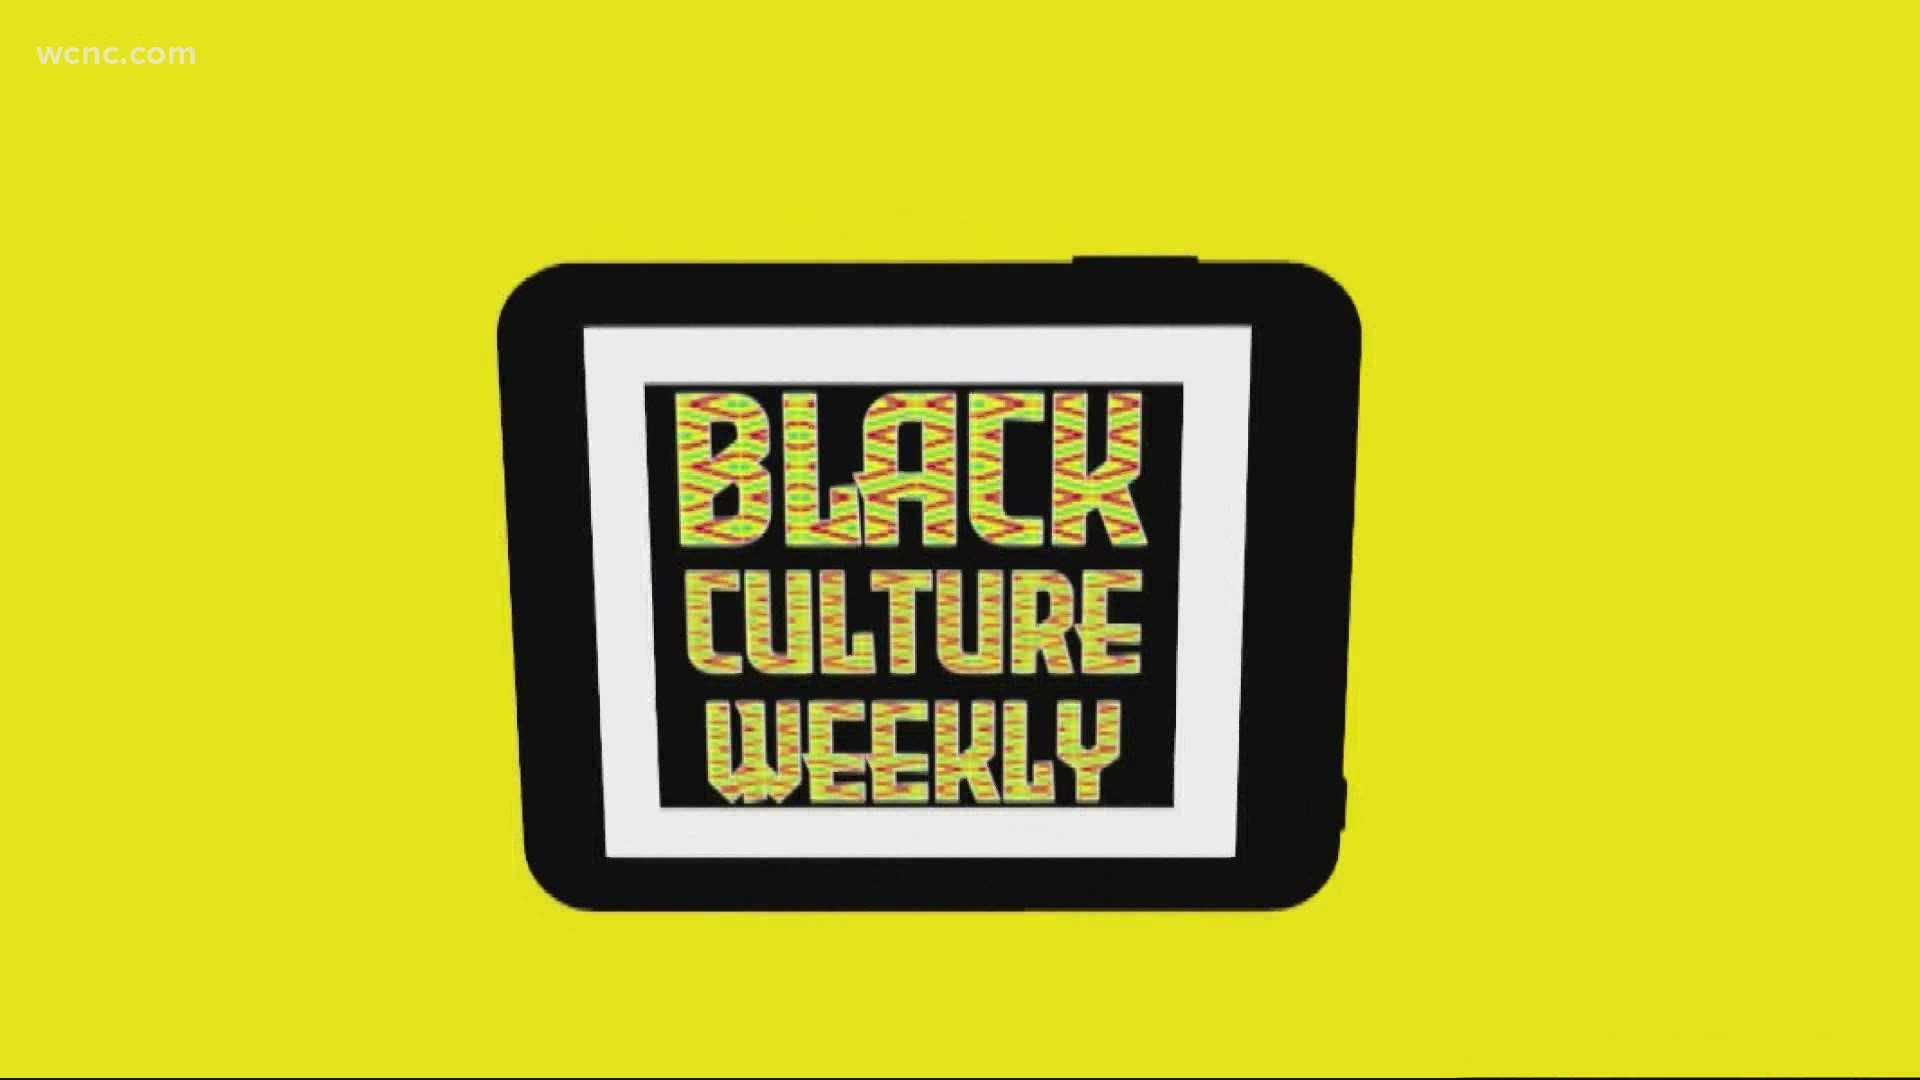 Black Culture Weekly helps people stay in the know about Black businesses, news and organizations.